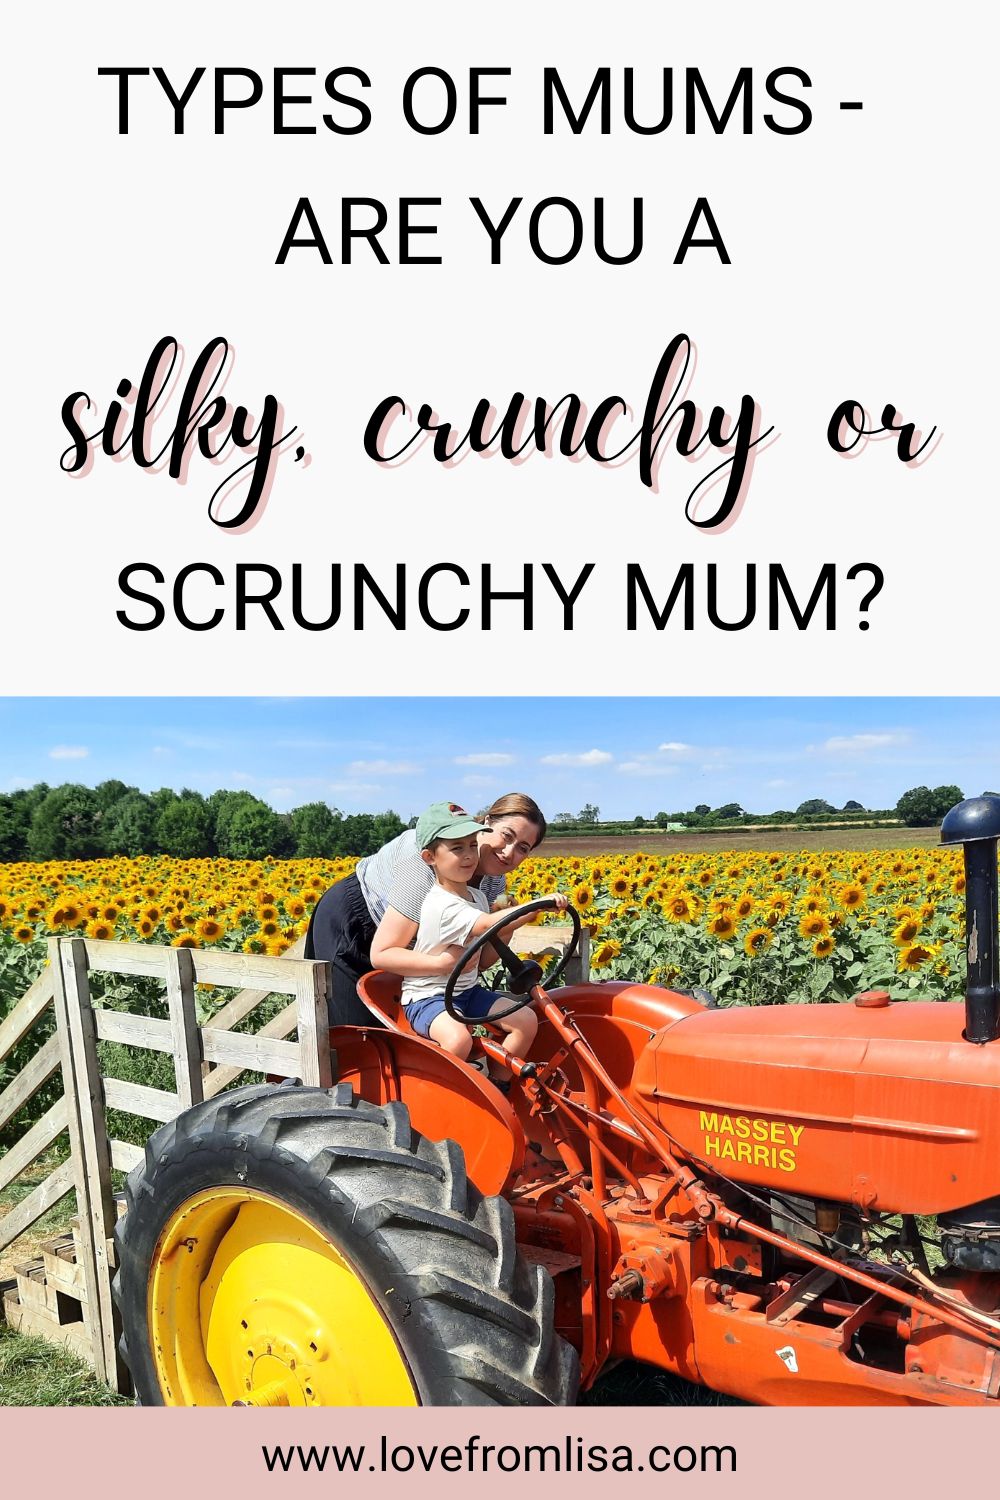 Types of mums, what is a silky, crunchy or scrunchy mum?